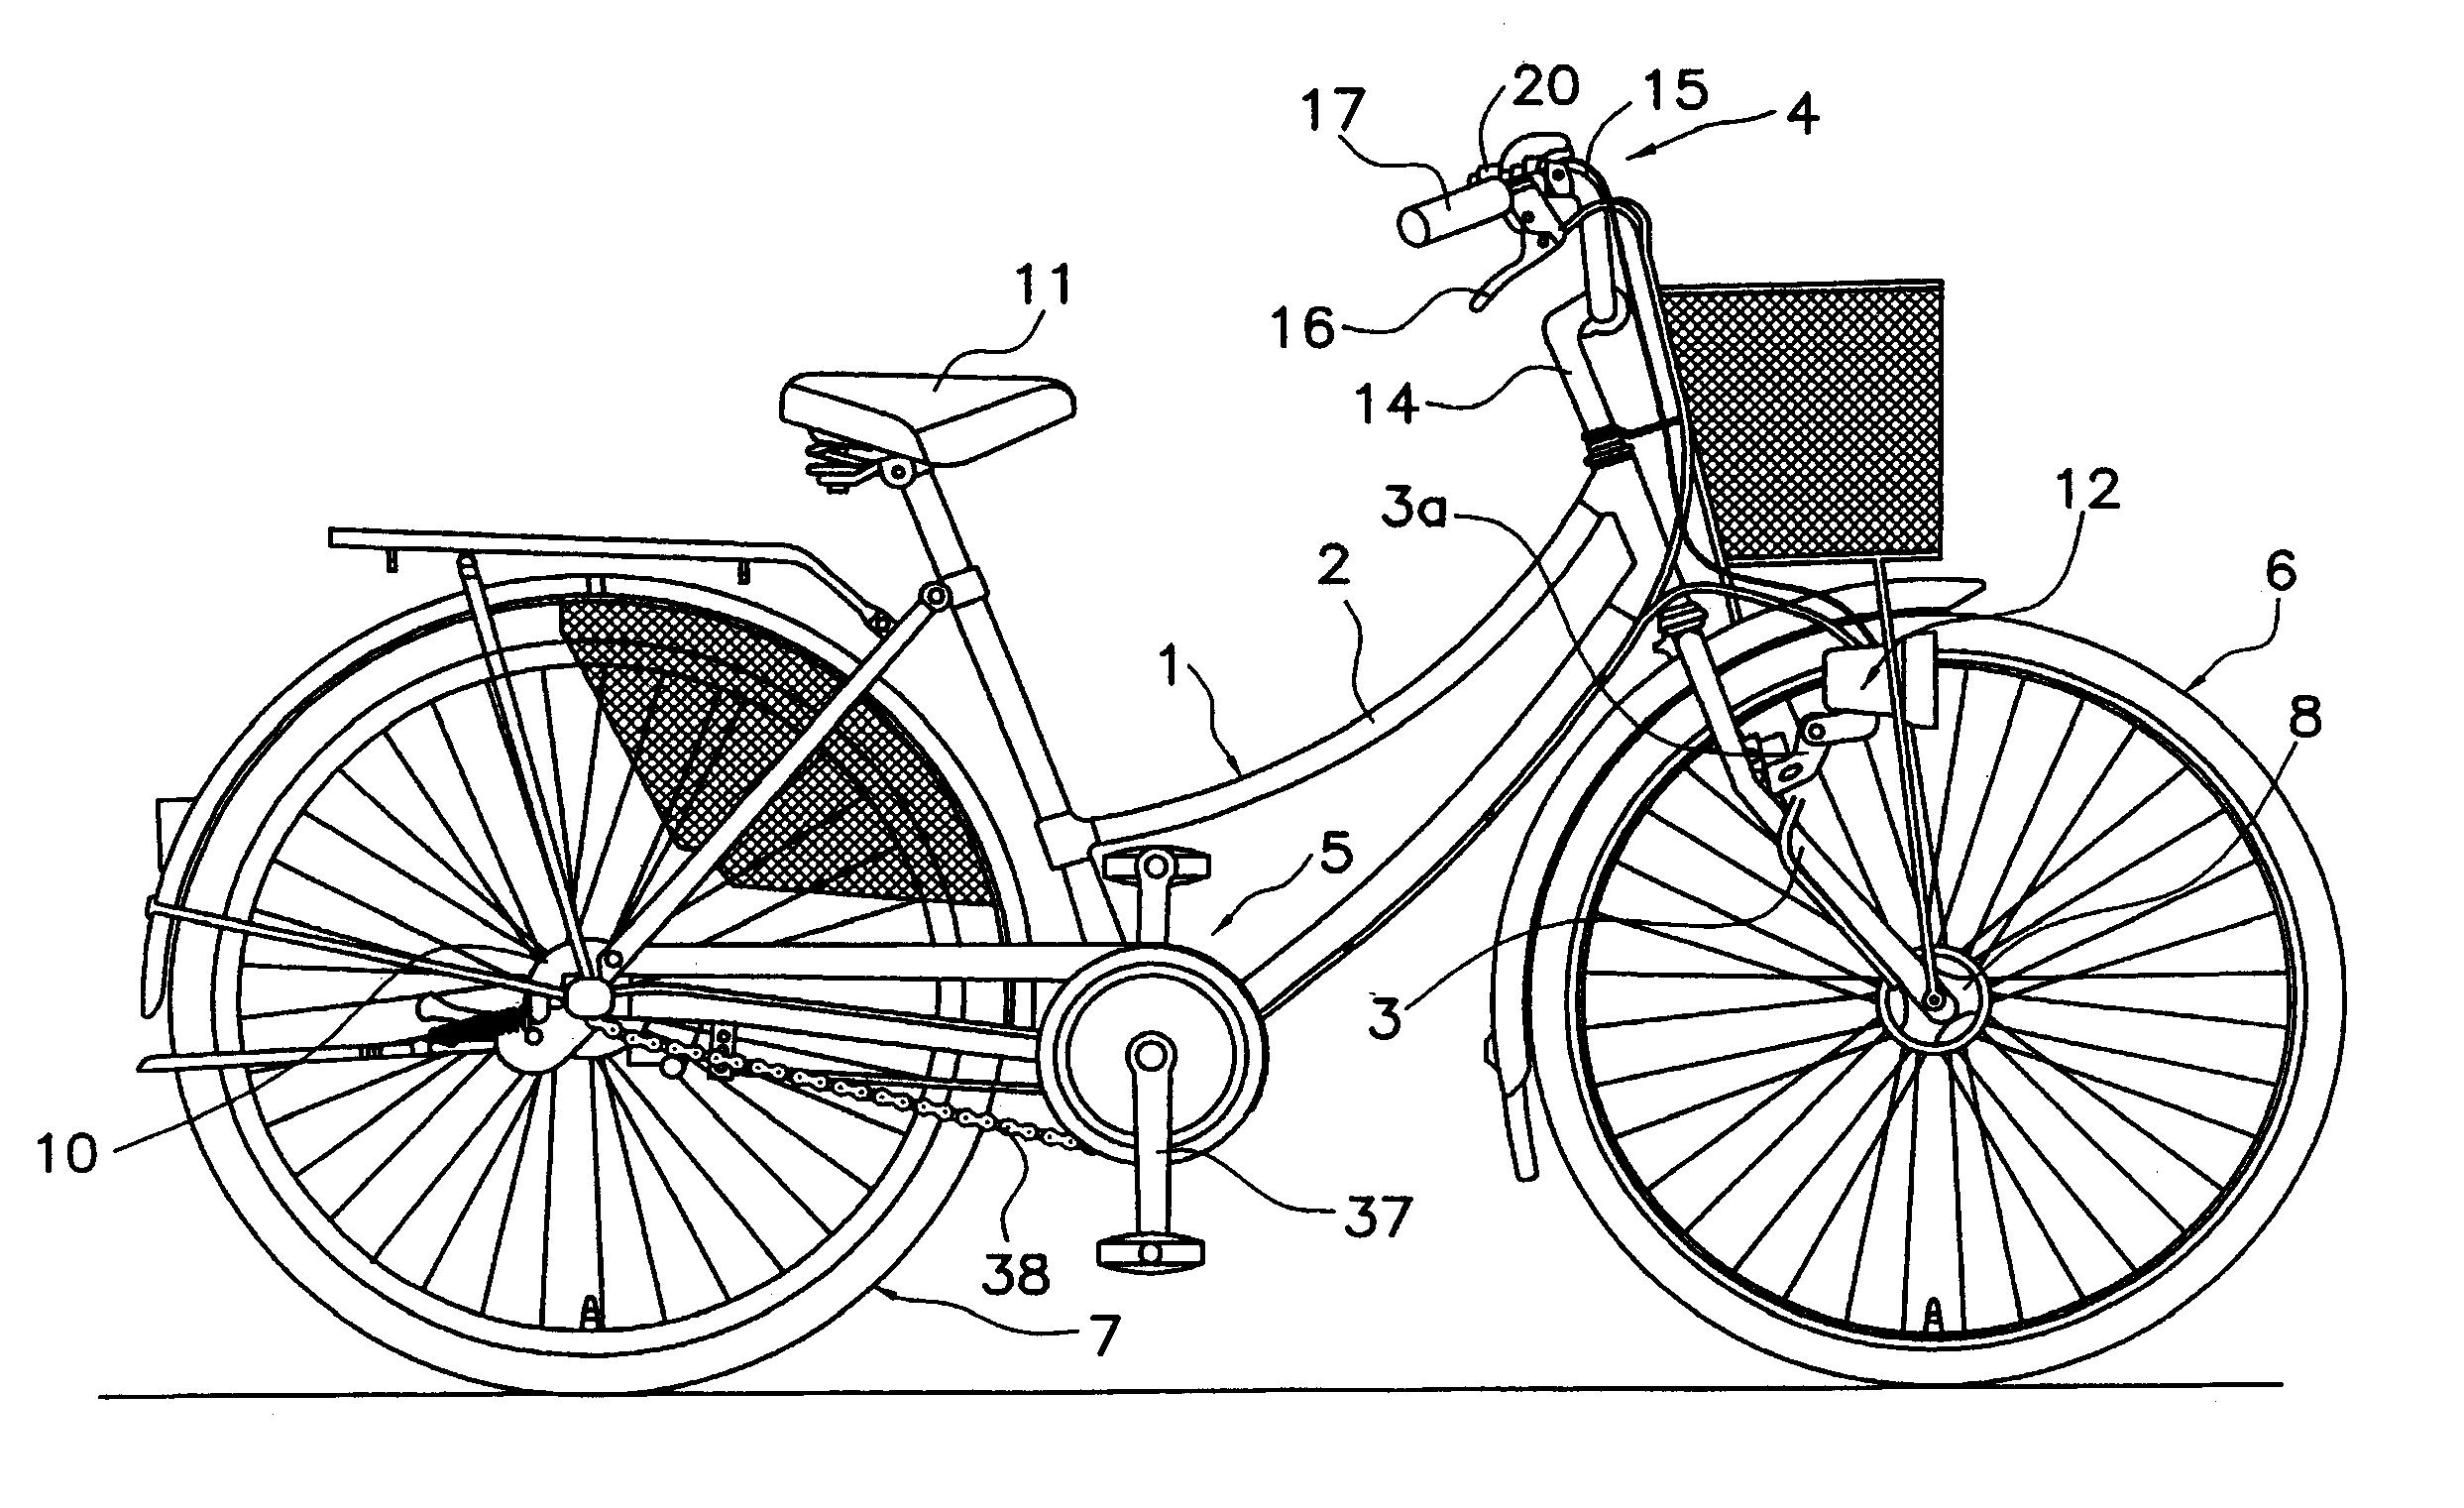 Bicycle power supply with discharge function